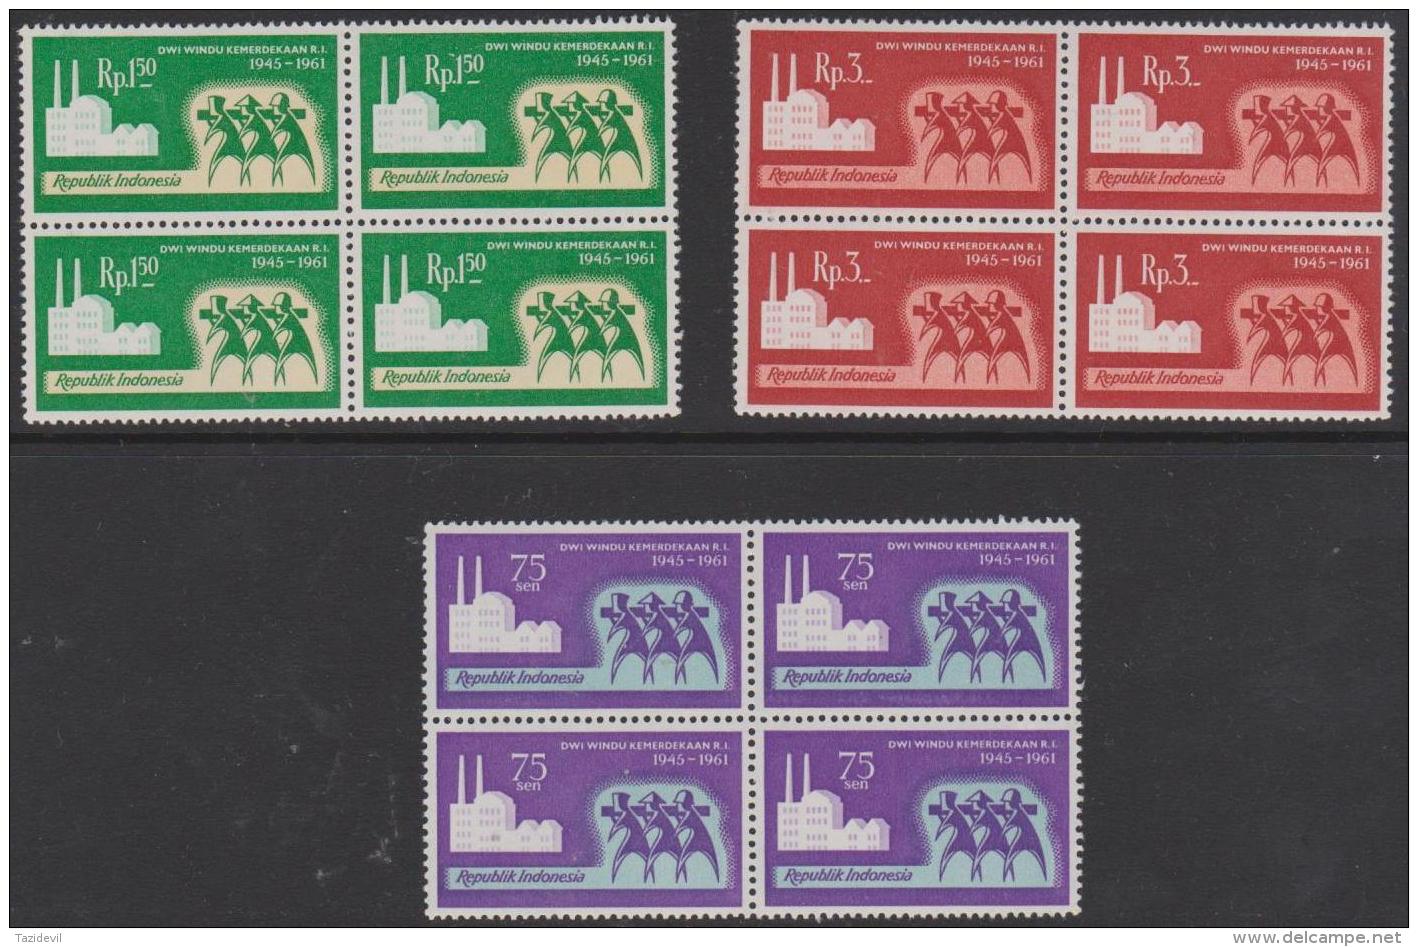 INDONESIA - 1961 Independence Anniversary Blocks Of Four. Scott 520-522. MNH - Indonesia